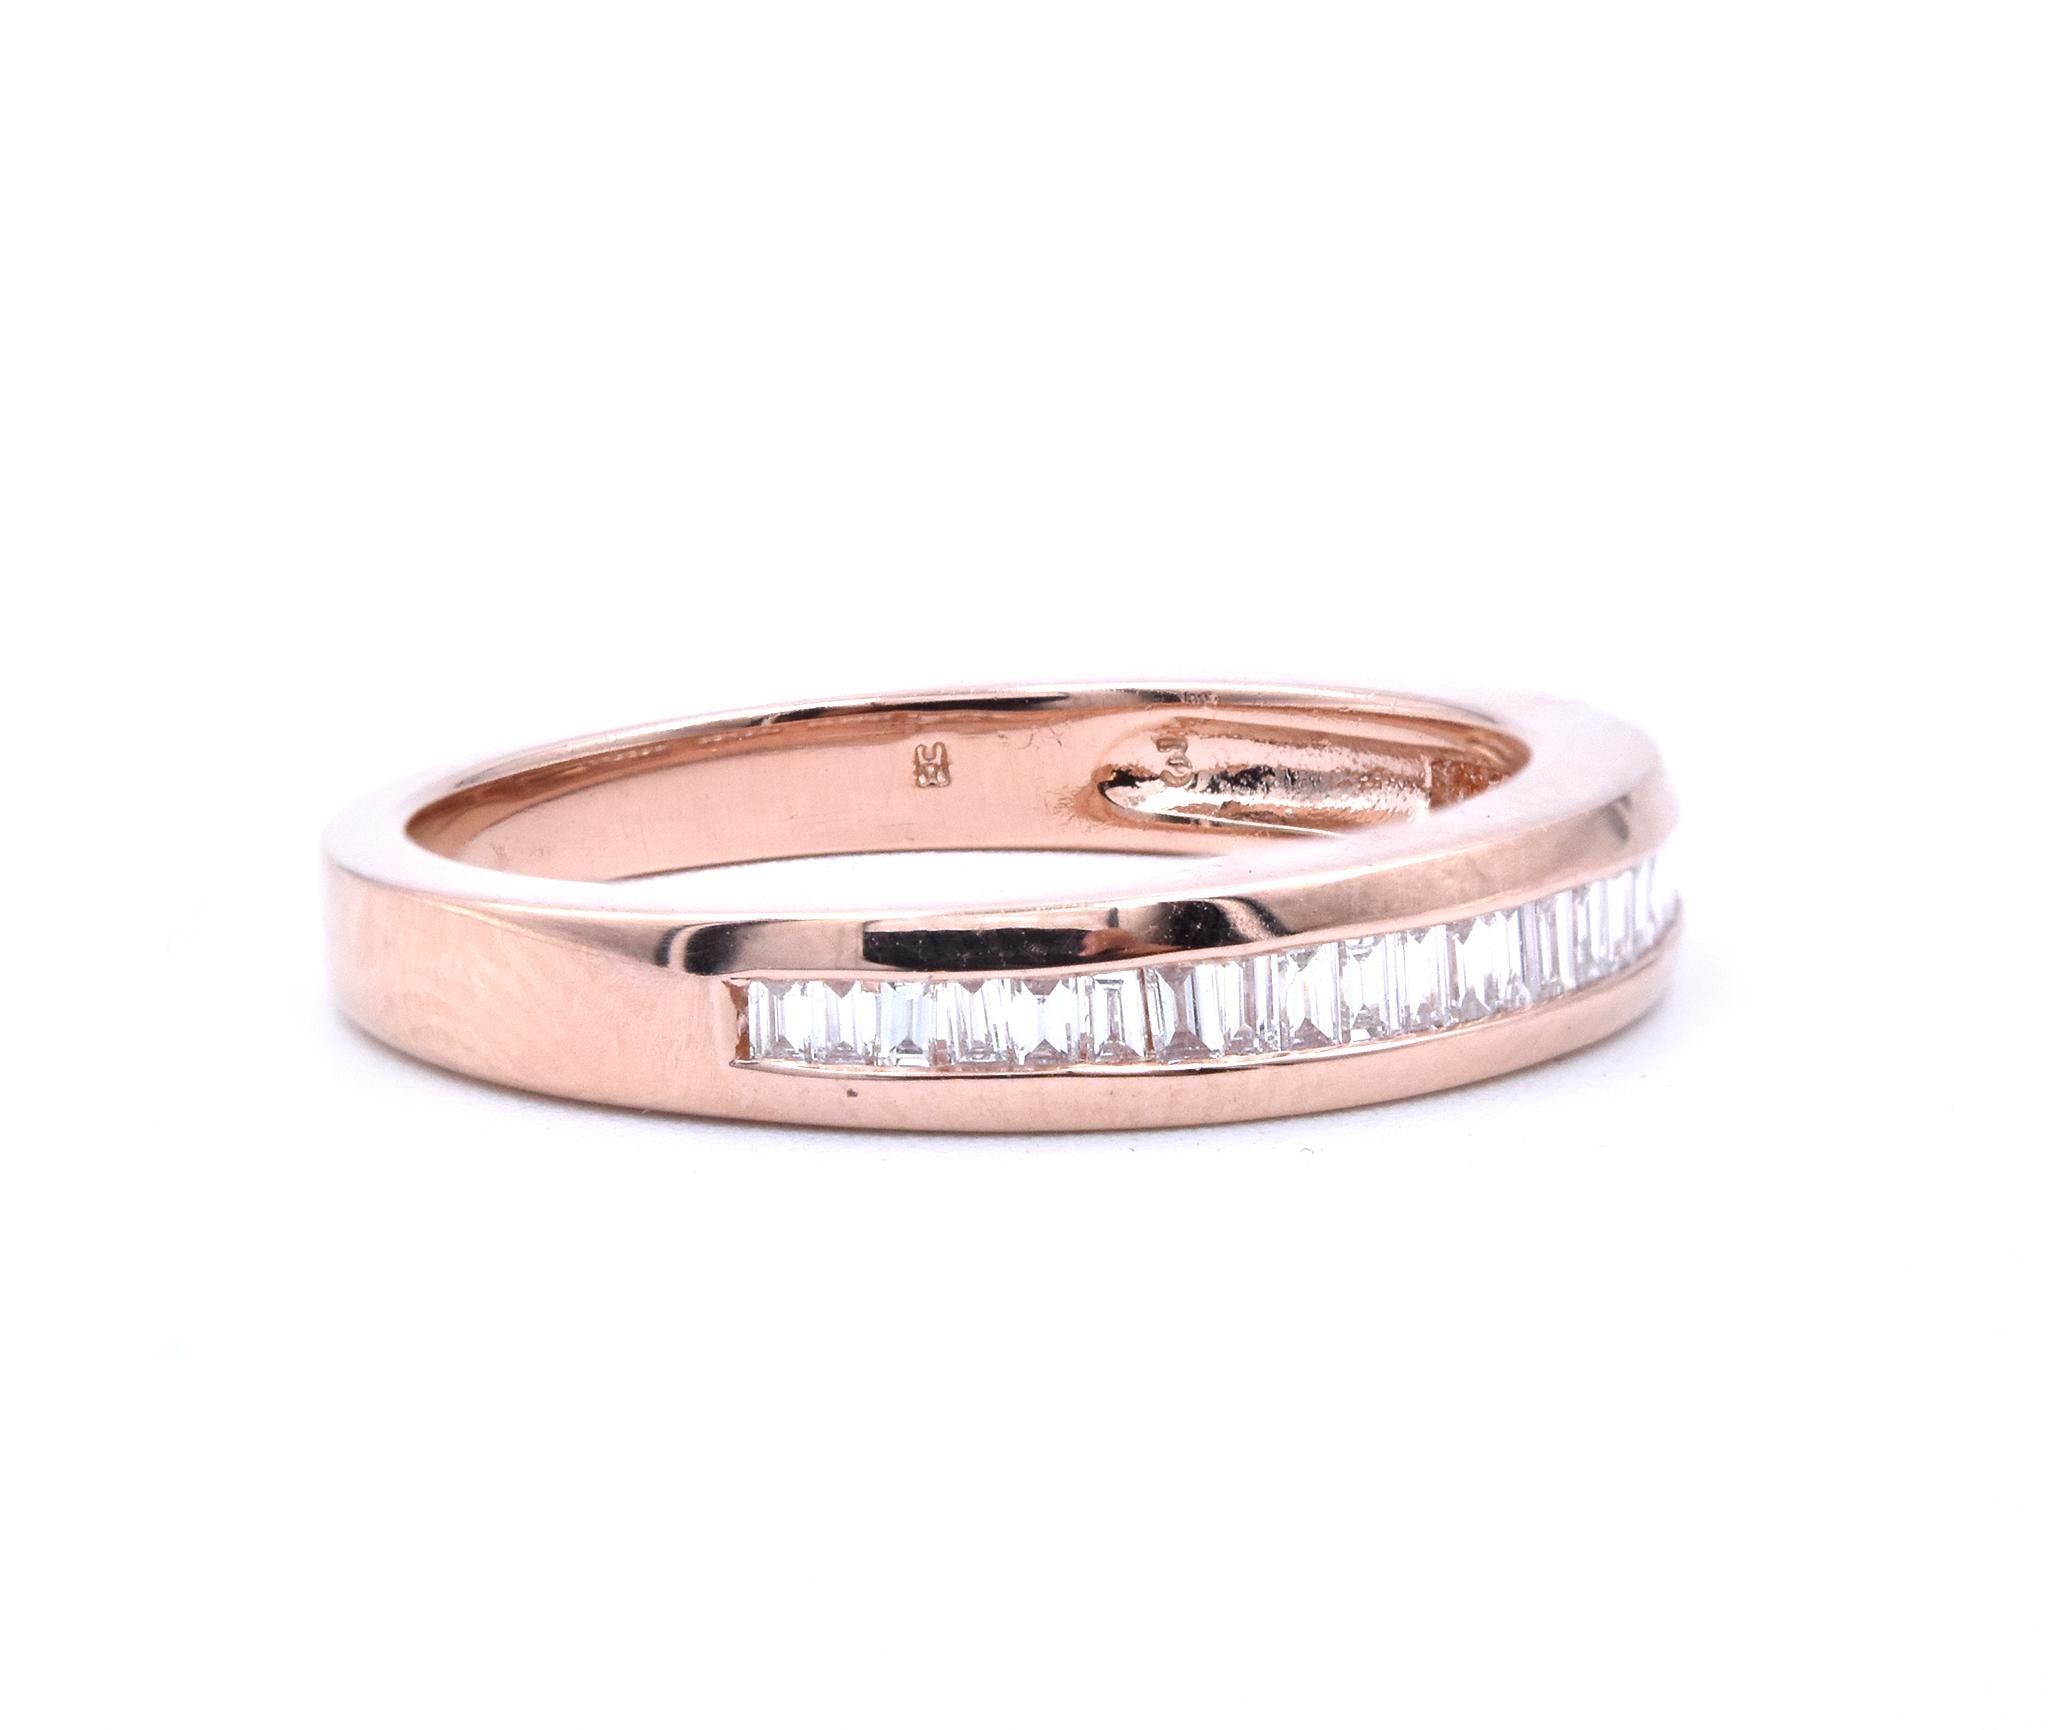 Material: 14K rose gold 
Diamonds: 24 baguette cut = .25cttw
Color: H
Clarity: SI1
Ring Size: 7 (please allow up to 2 additional business days for sizing requests)
Dimensions: ring measures 3.7mm wide
Weight: 3.65 grams